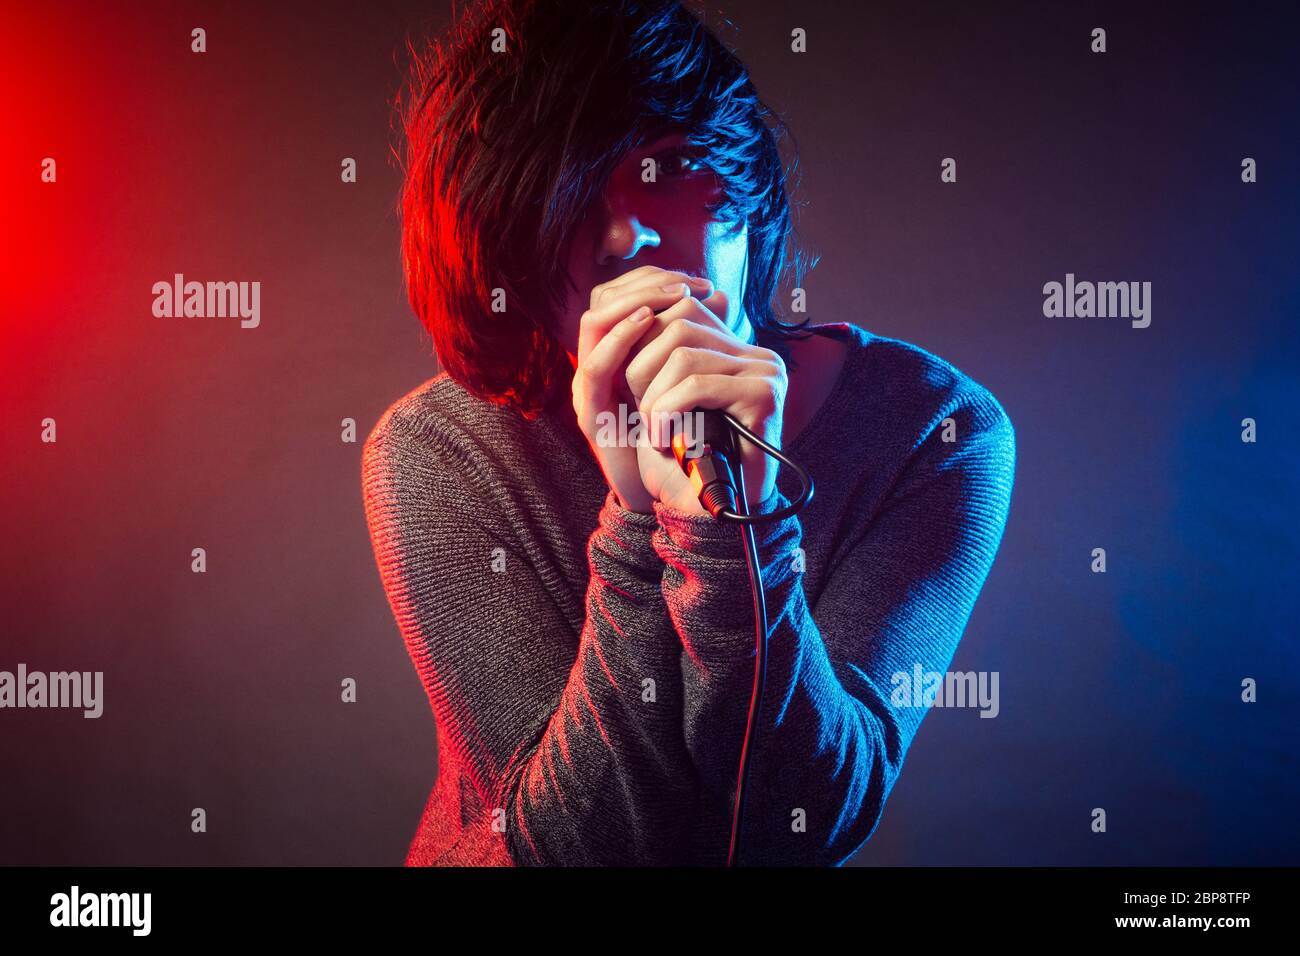 The young singer or vocalist in emo style is singing on concert on background of red and blue concert lights. Stock Photo